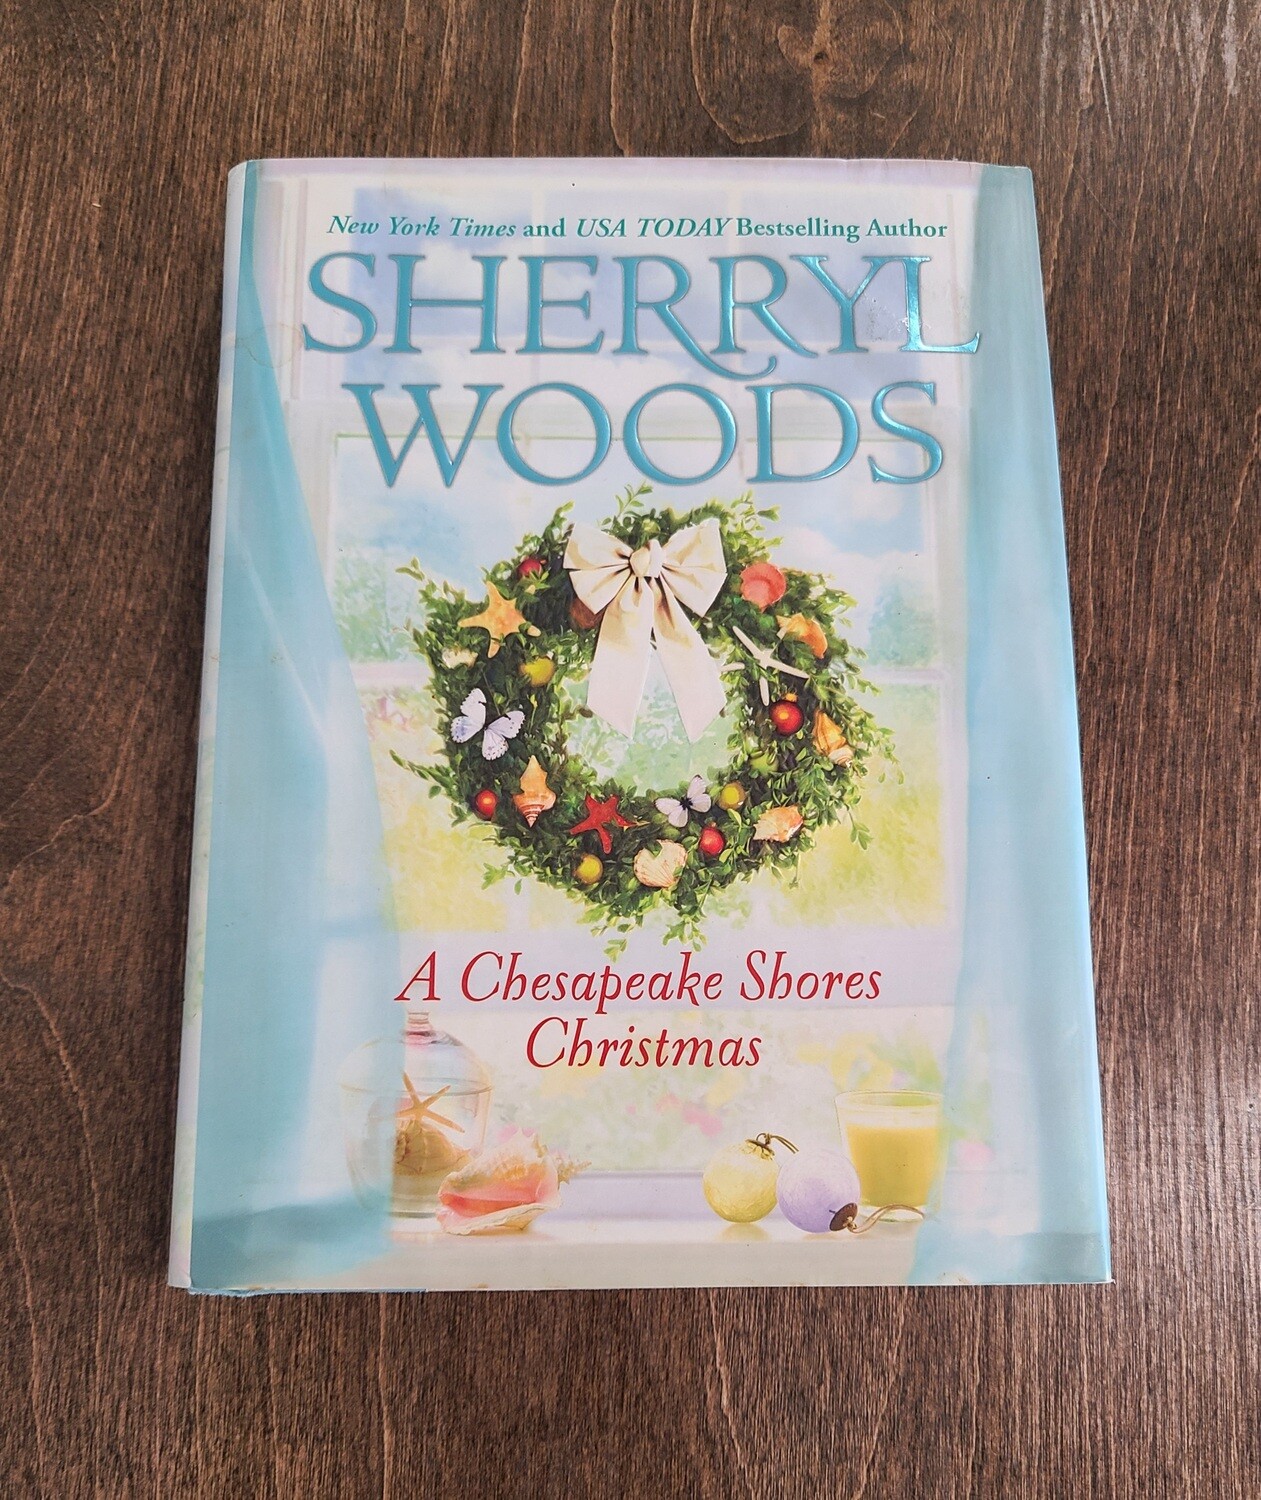 A Chesapeake Shores Christmas by Sherryl Woods